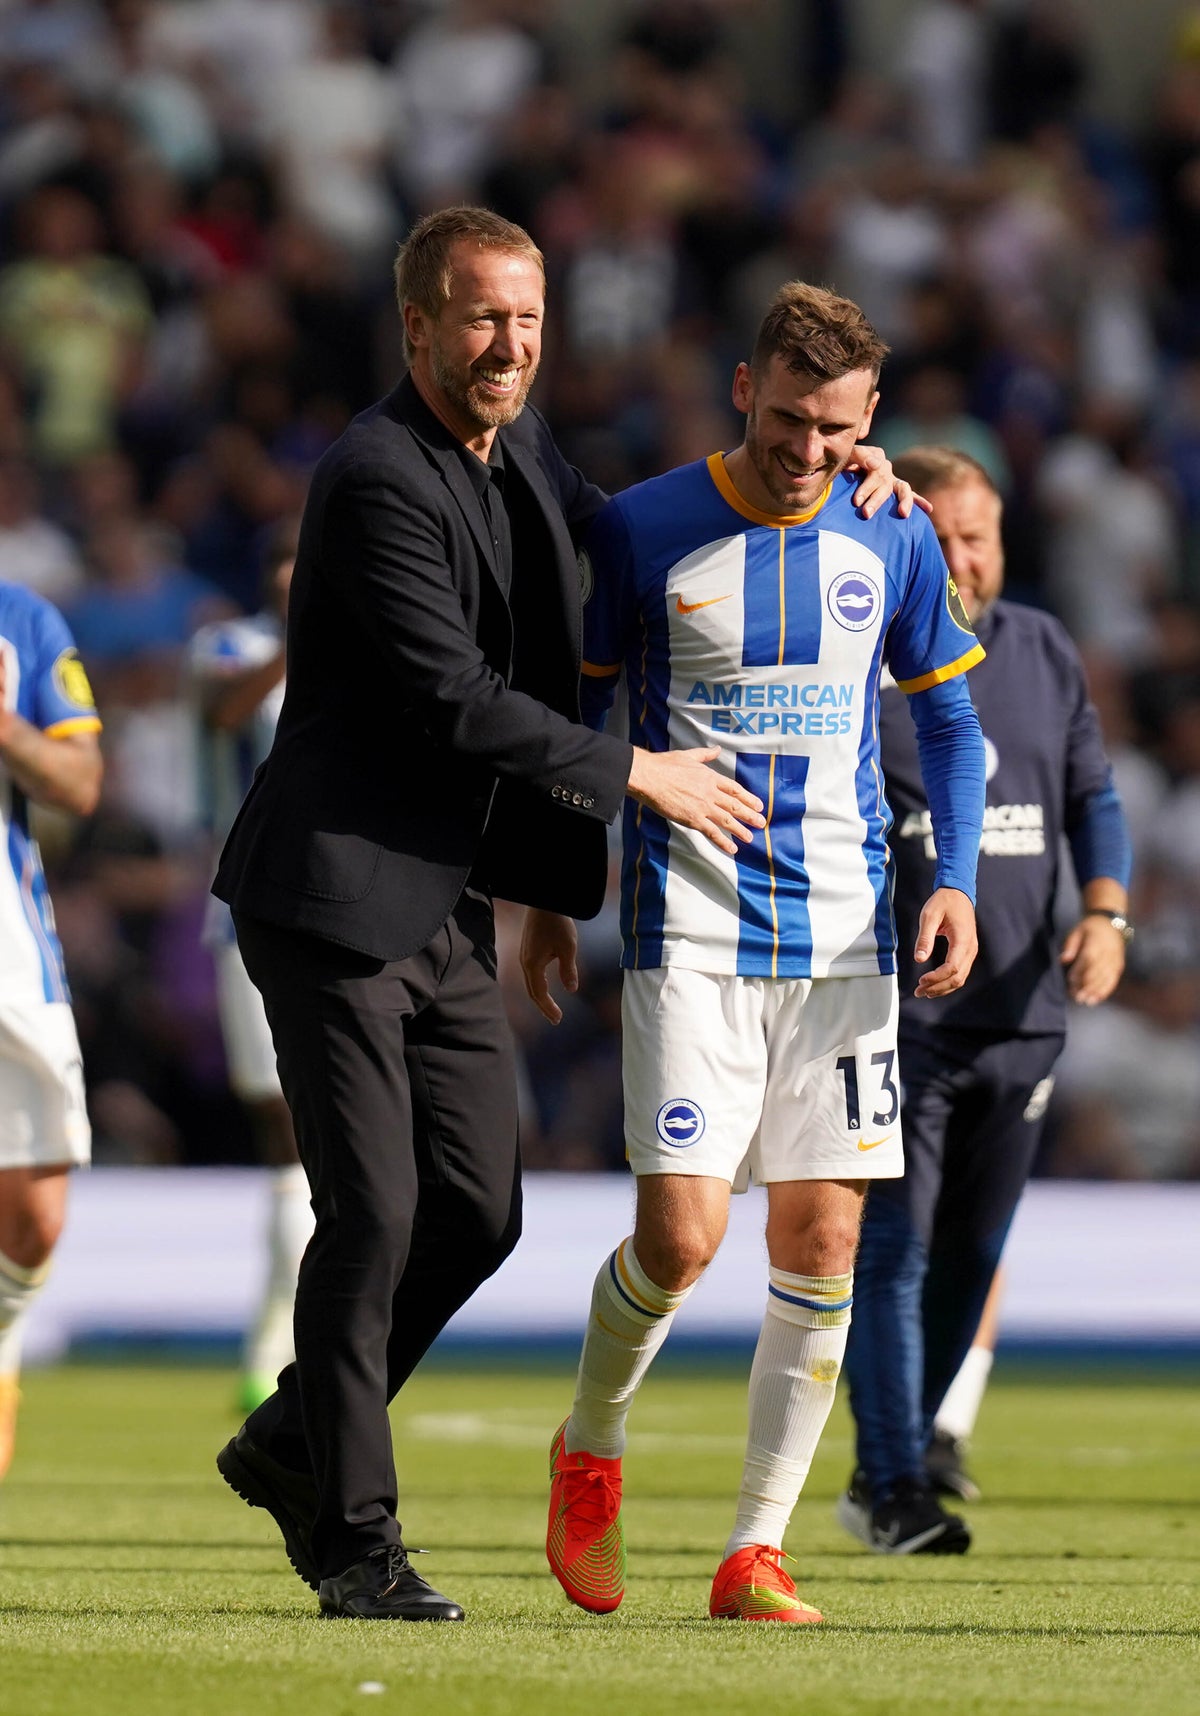 Pascal Gross in the best form of his career – Brighton boss Graham Potter